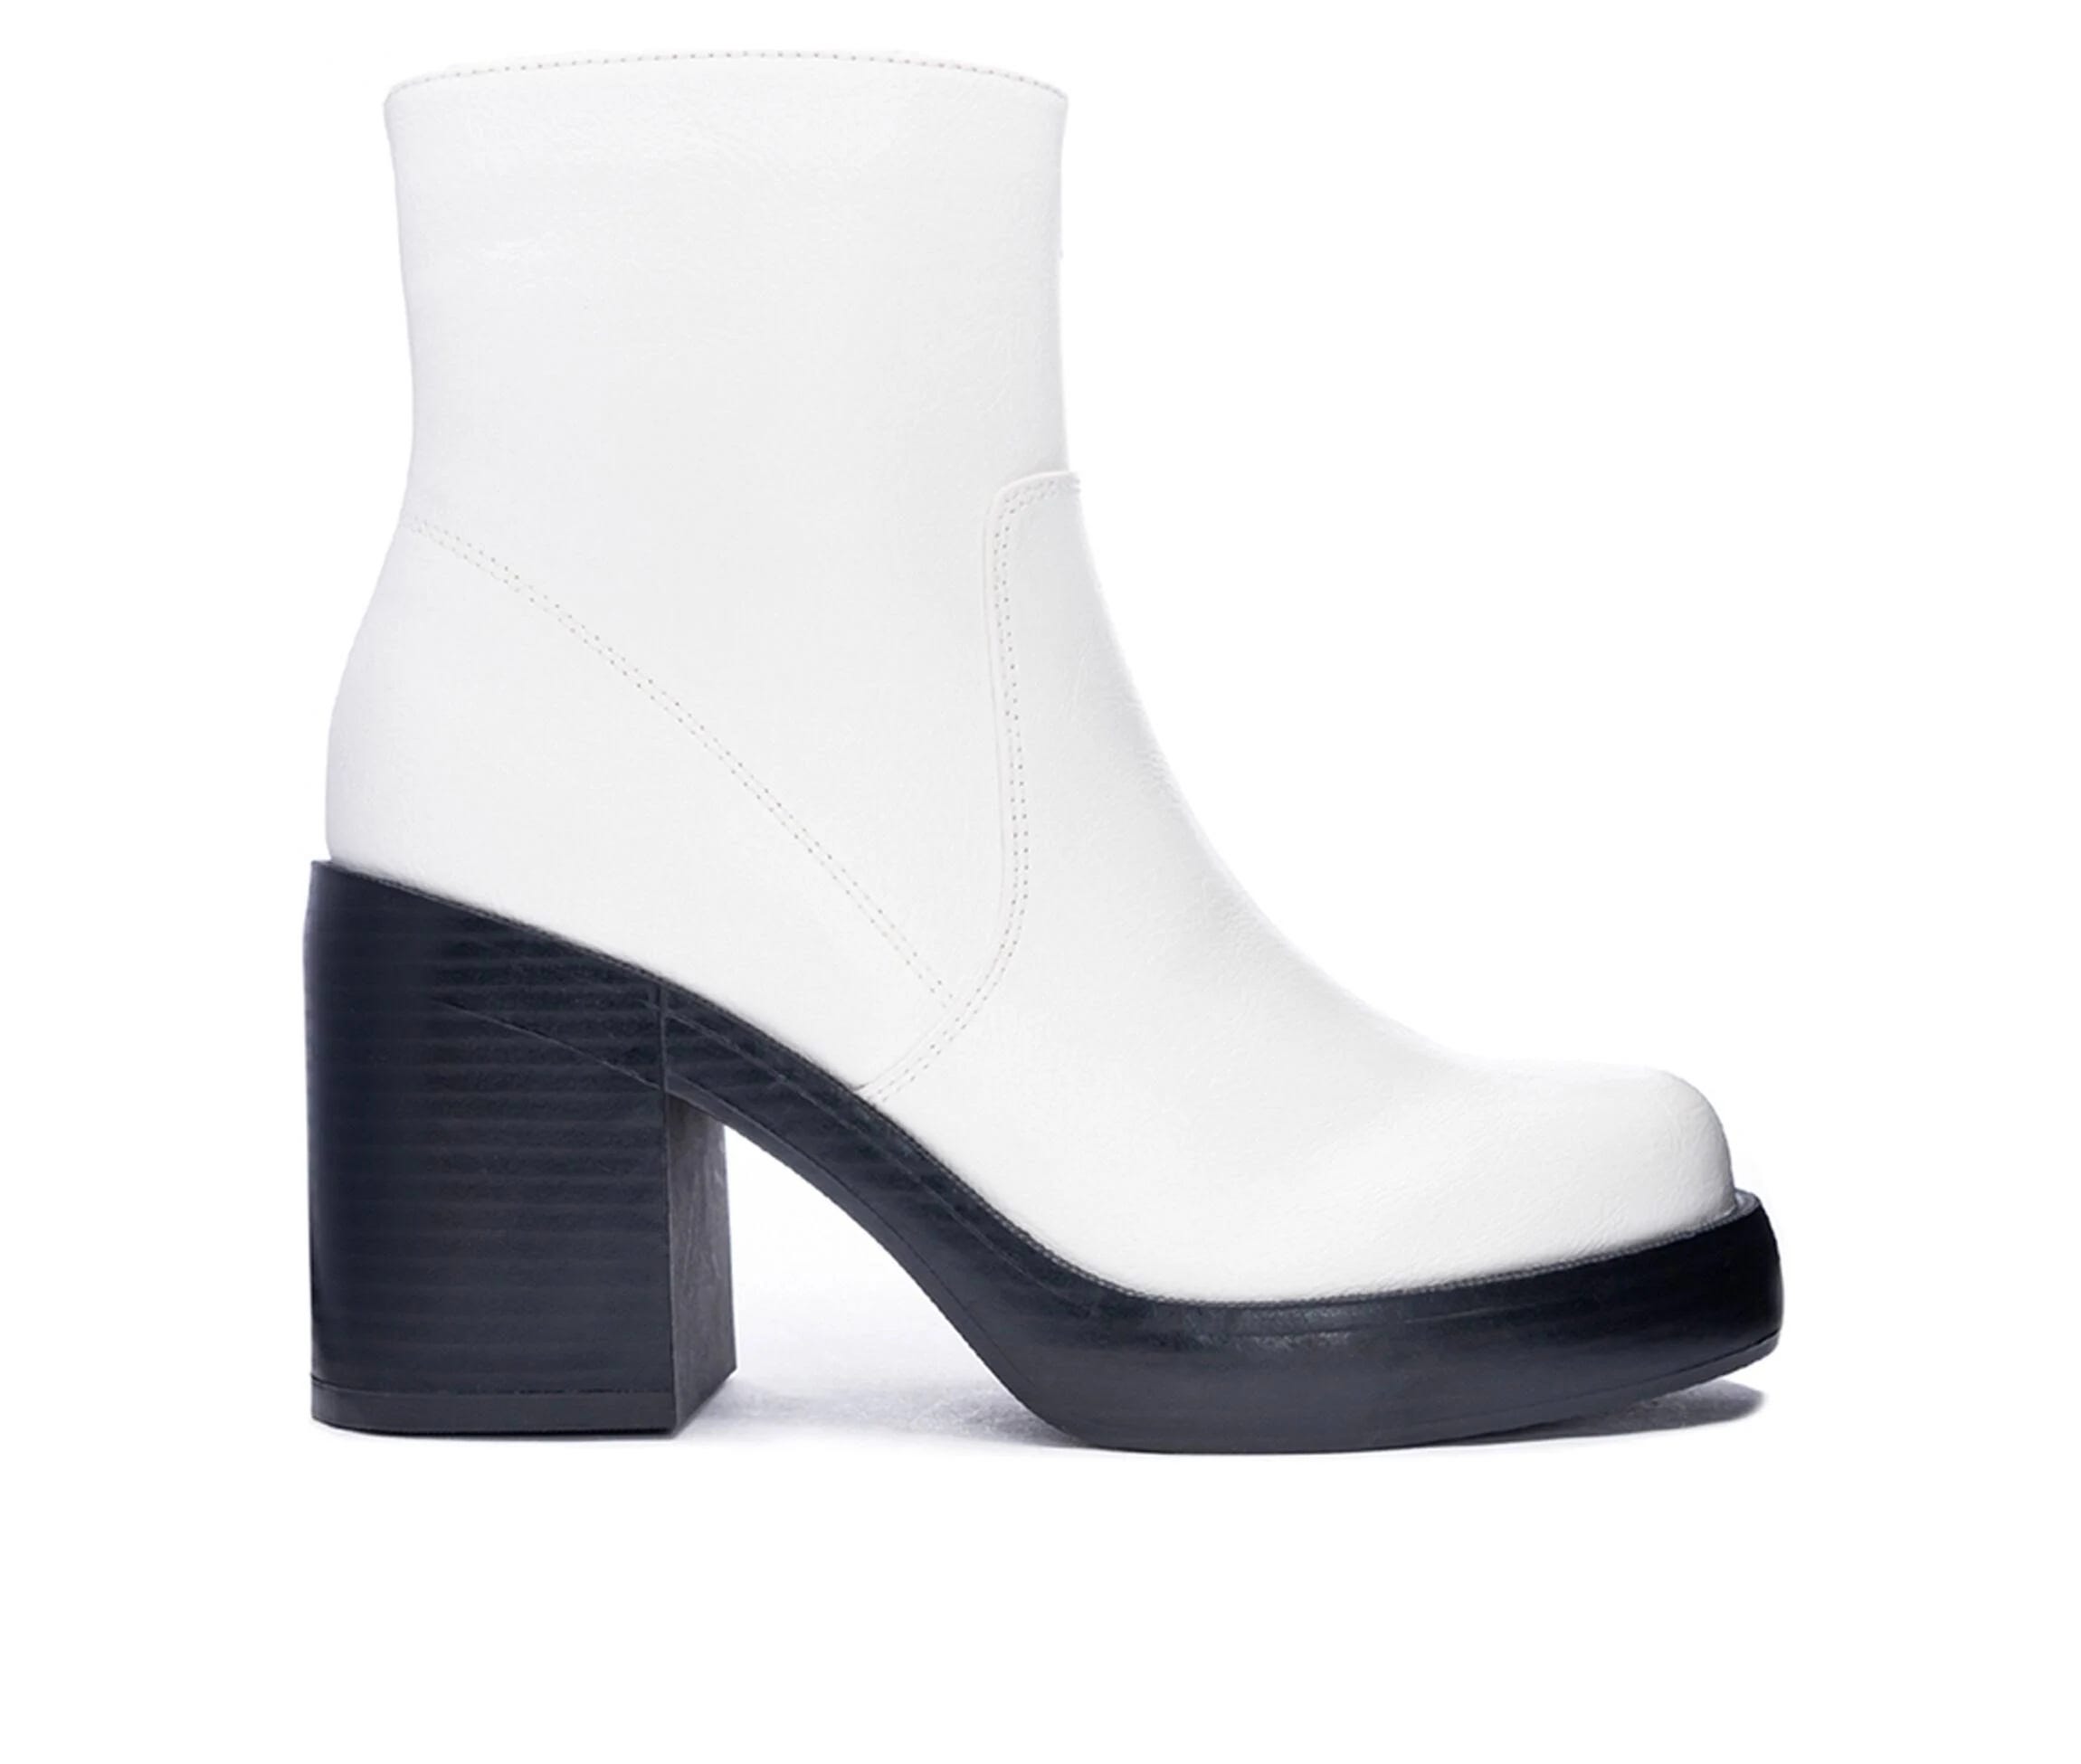 90s-Inspired White Square Toe Boots - Made in USA or Imported | Image